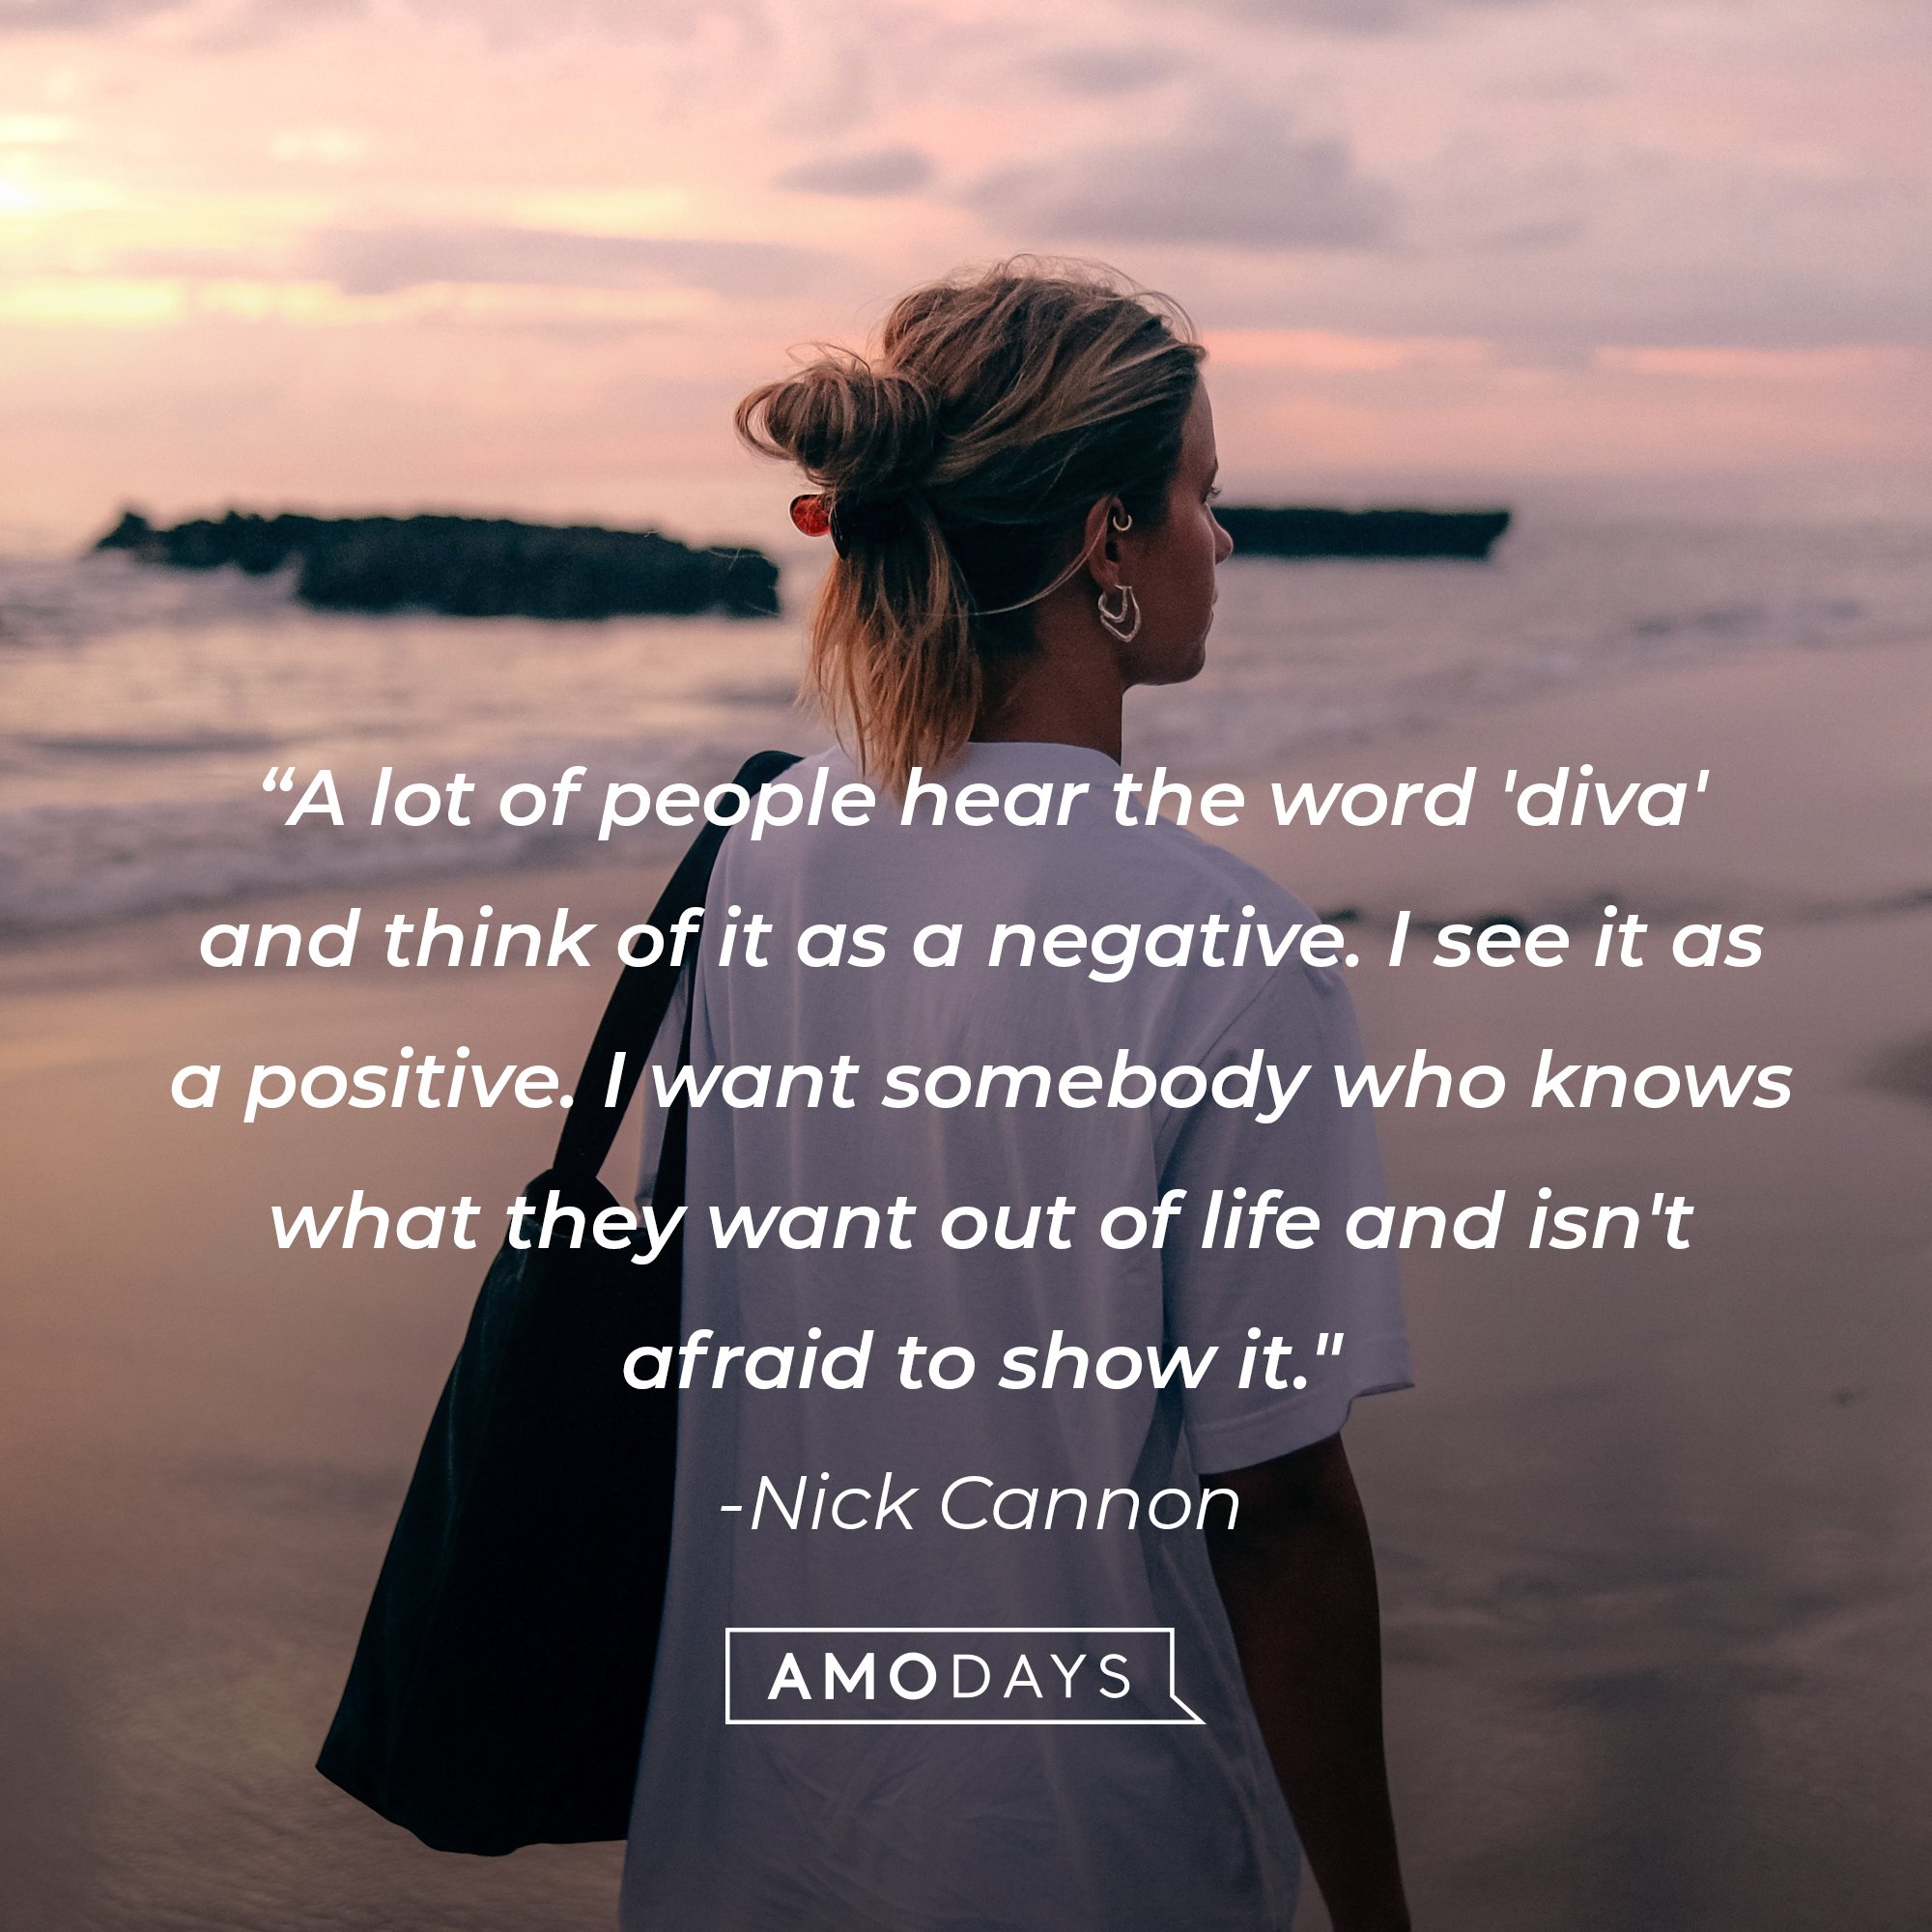 Nick Cannon’s quote” “A lot of people hear the word 'diva' and think of it as a negative. I see it as a positive. I want somebody who knows what they want out of life and isn't afraid to show it." | Image: Amodays